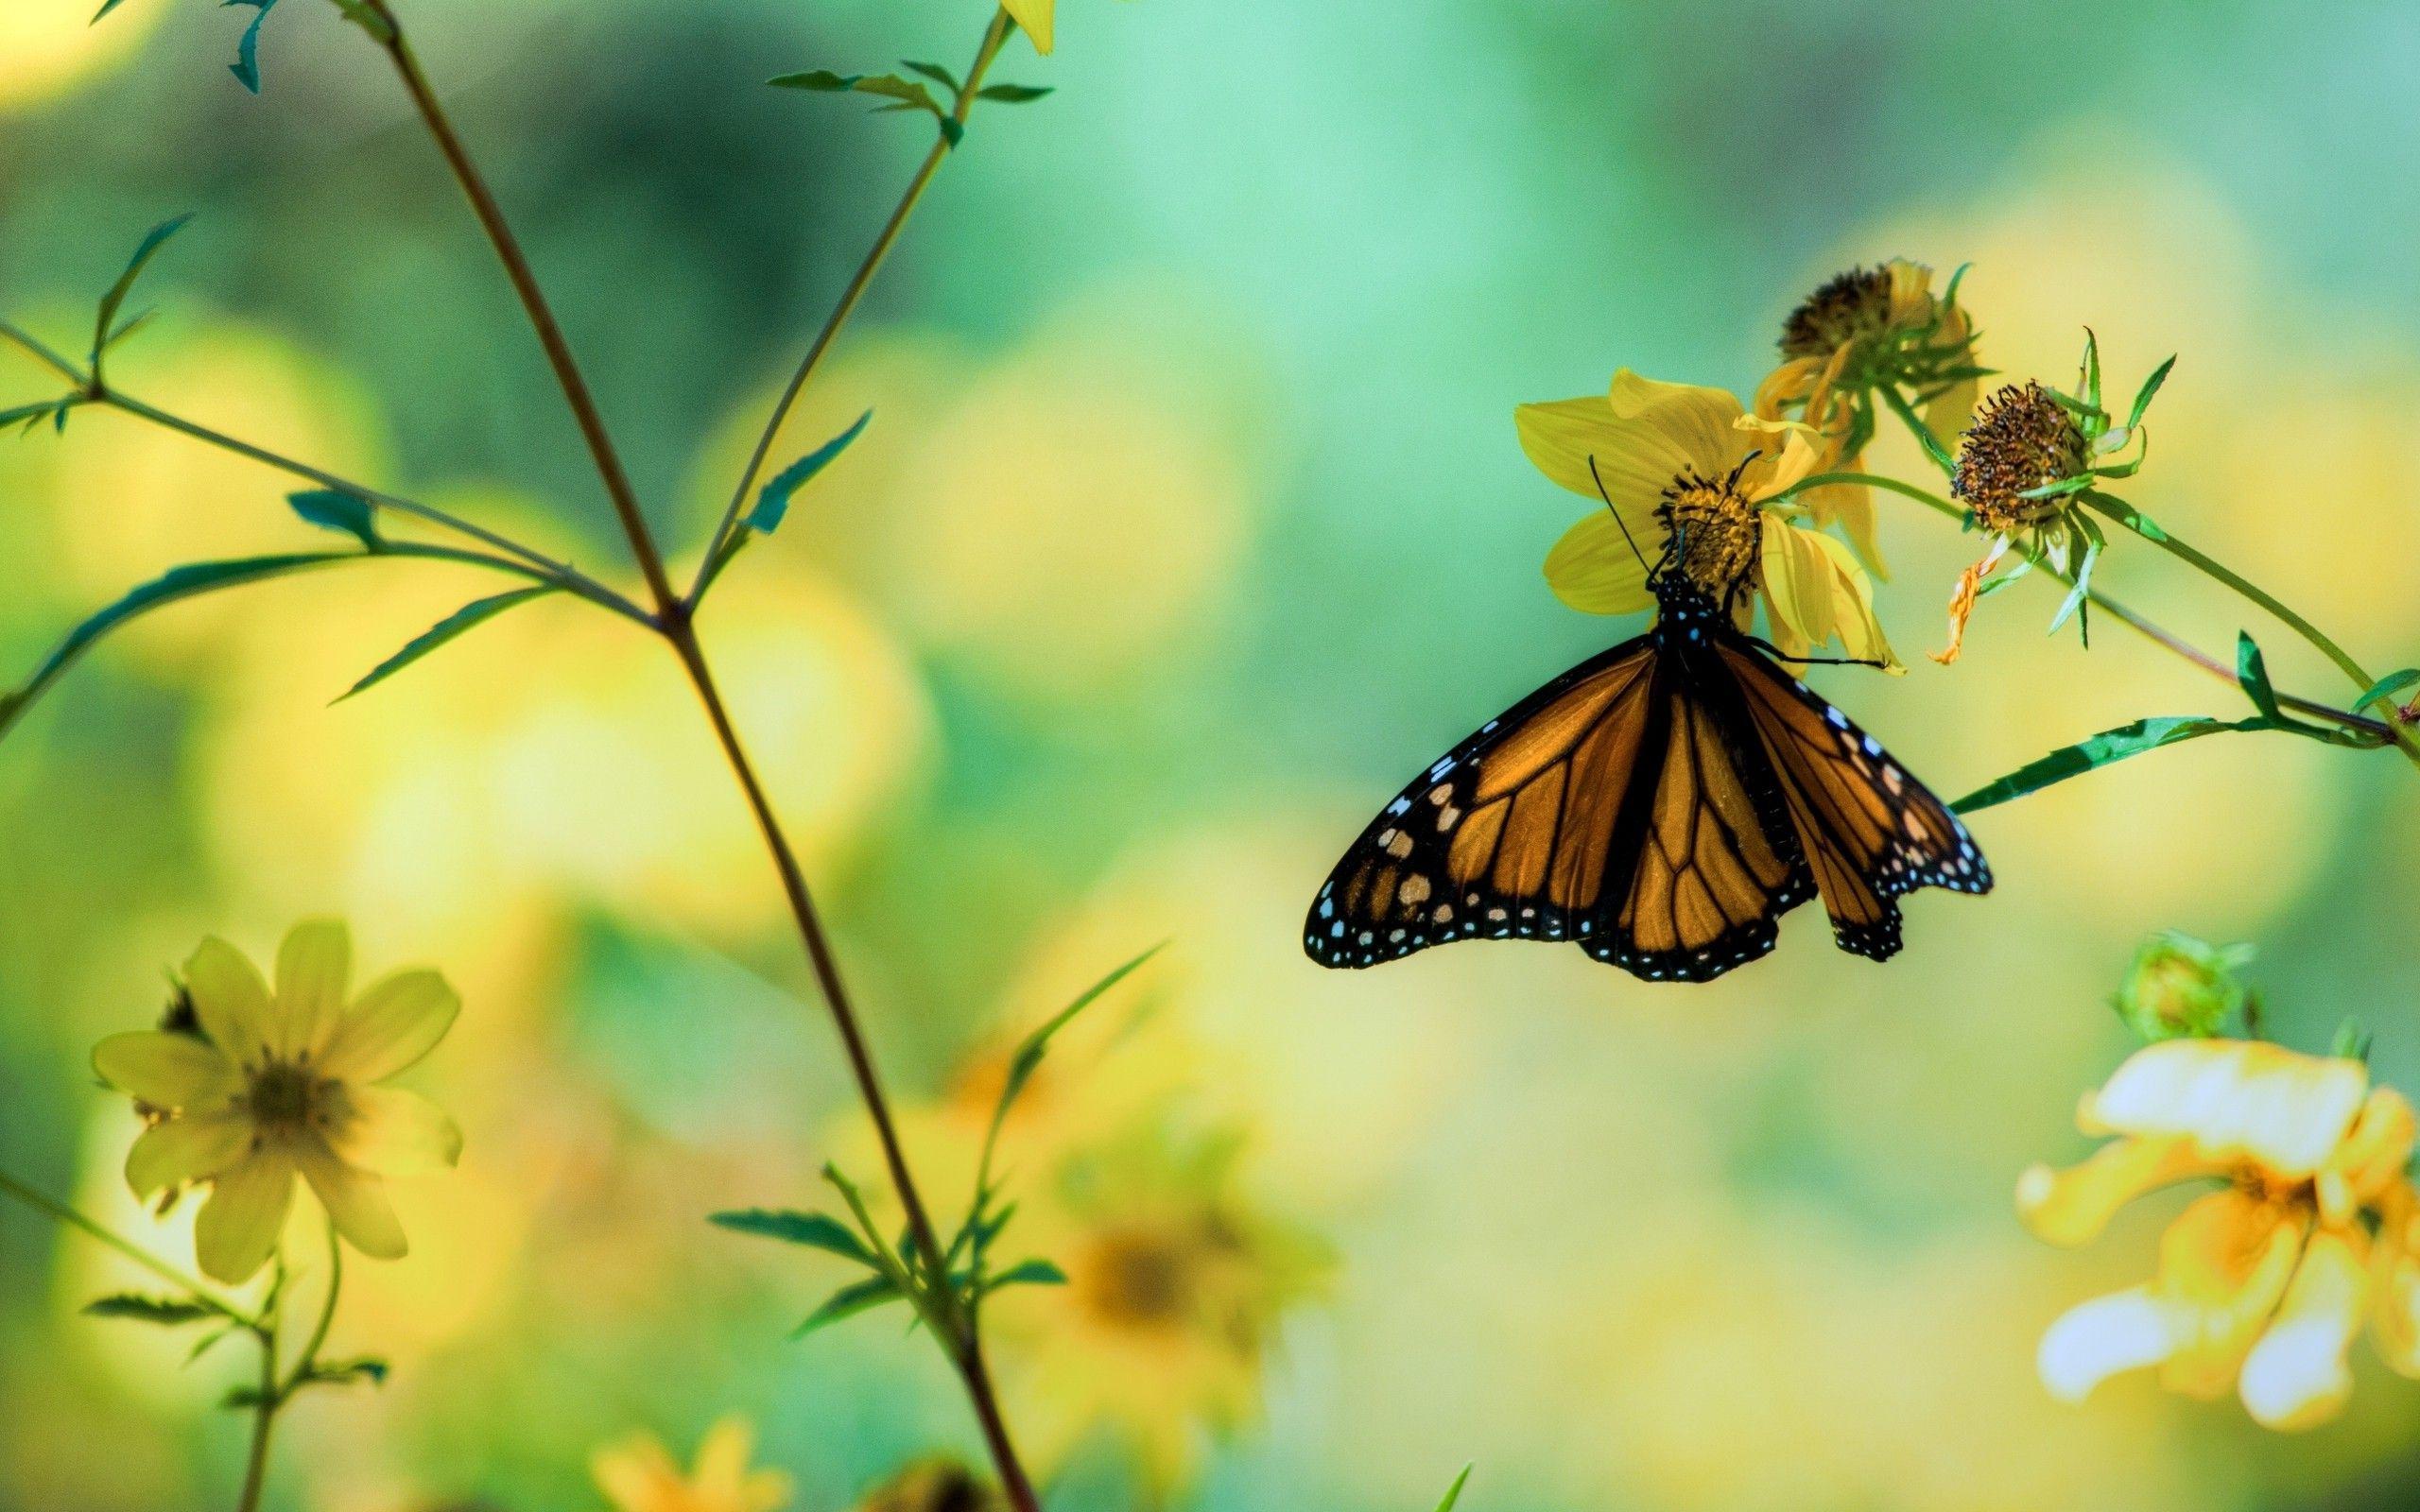 Daily Wallpaper: Butterfly Garden. I Like To Waste My Time